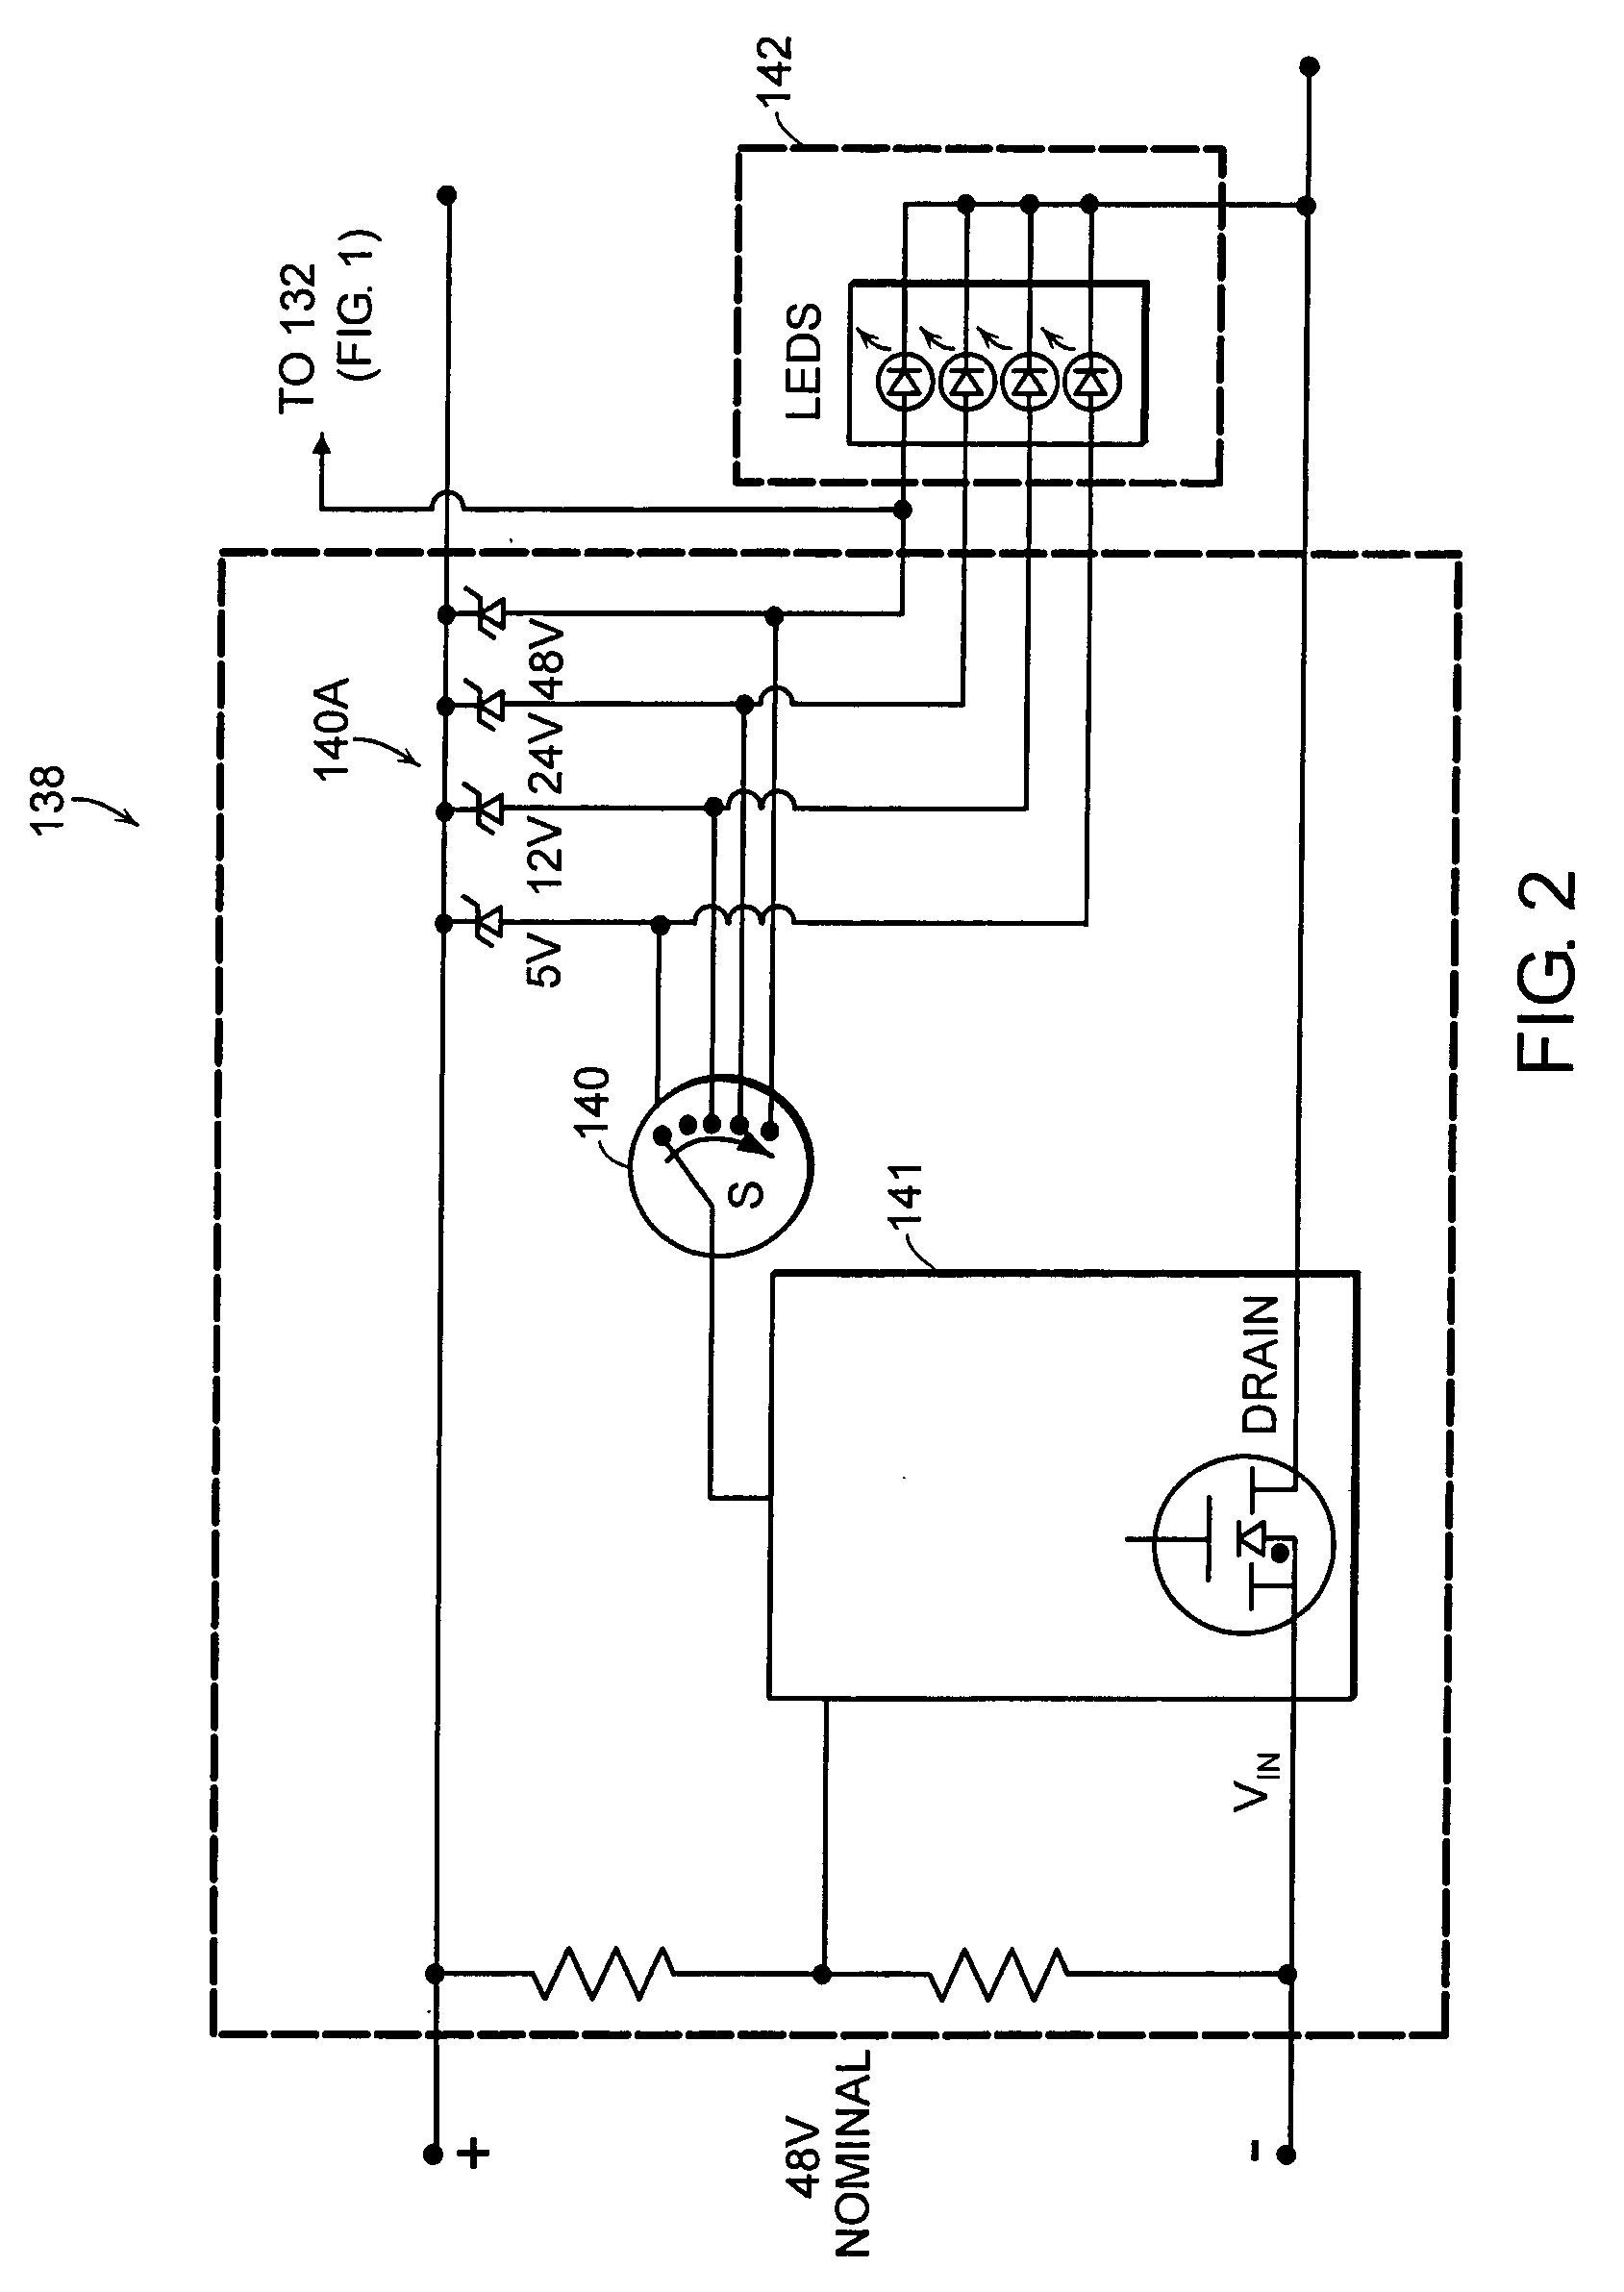 Transceiver apparatus and method having ethernet-over-power and power-over-ethernet capability